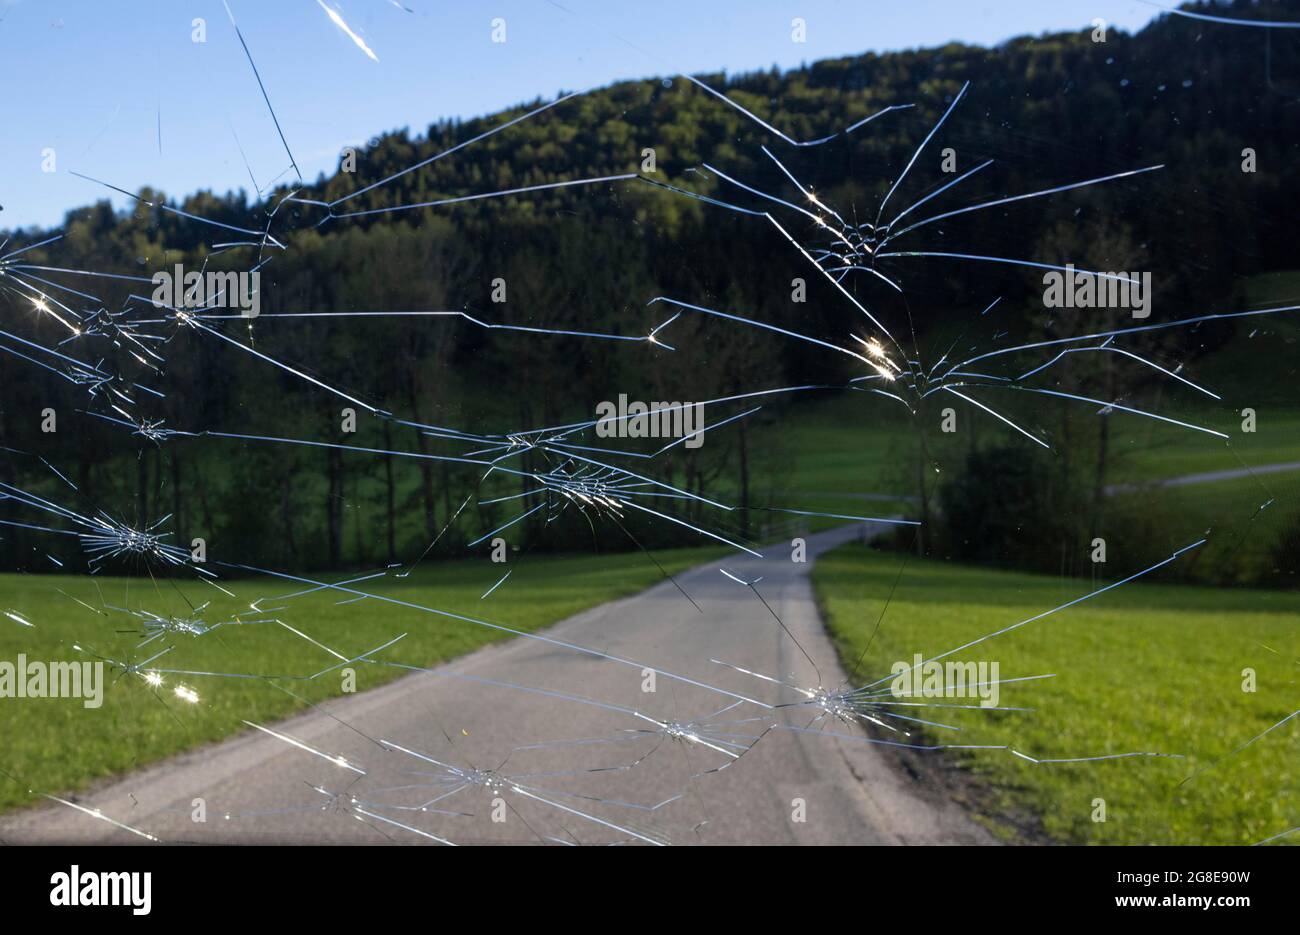 Shattered windscreen due to hailstones on a car, hail damage, Austria Stock Photo